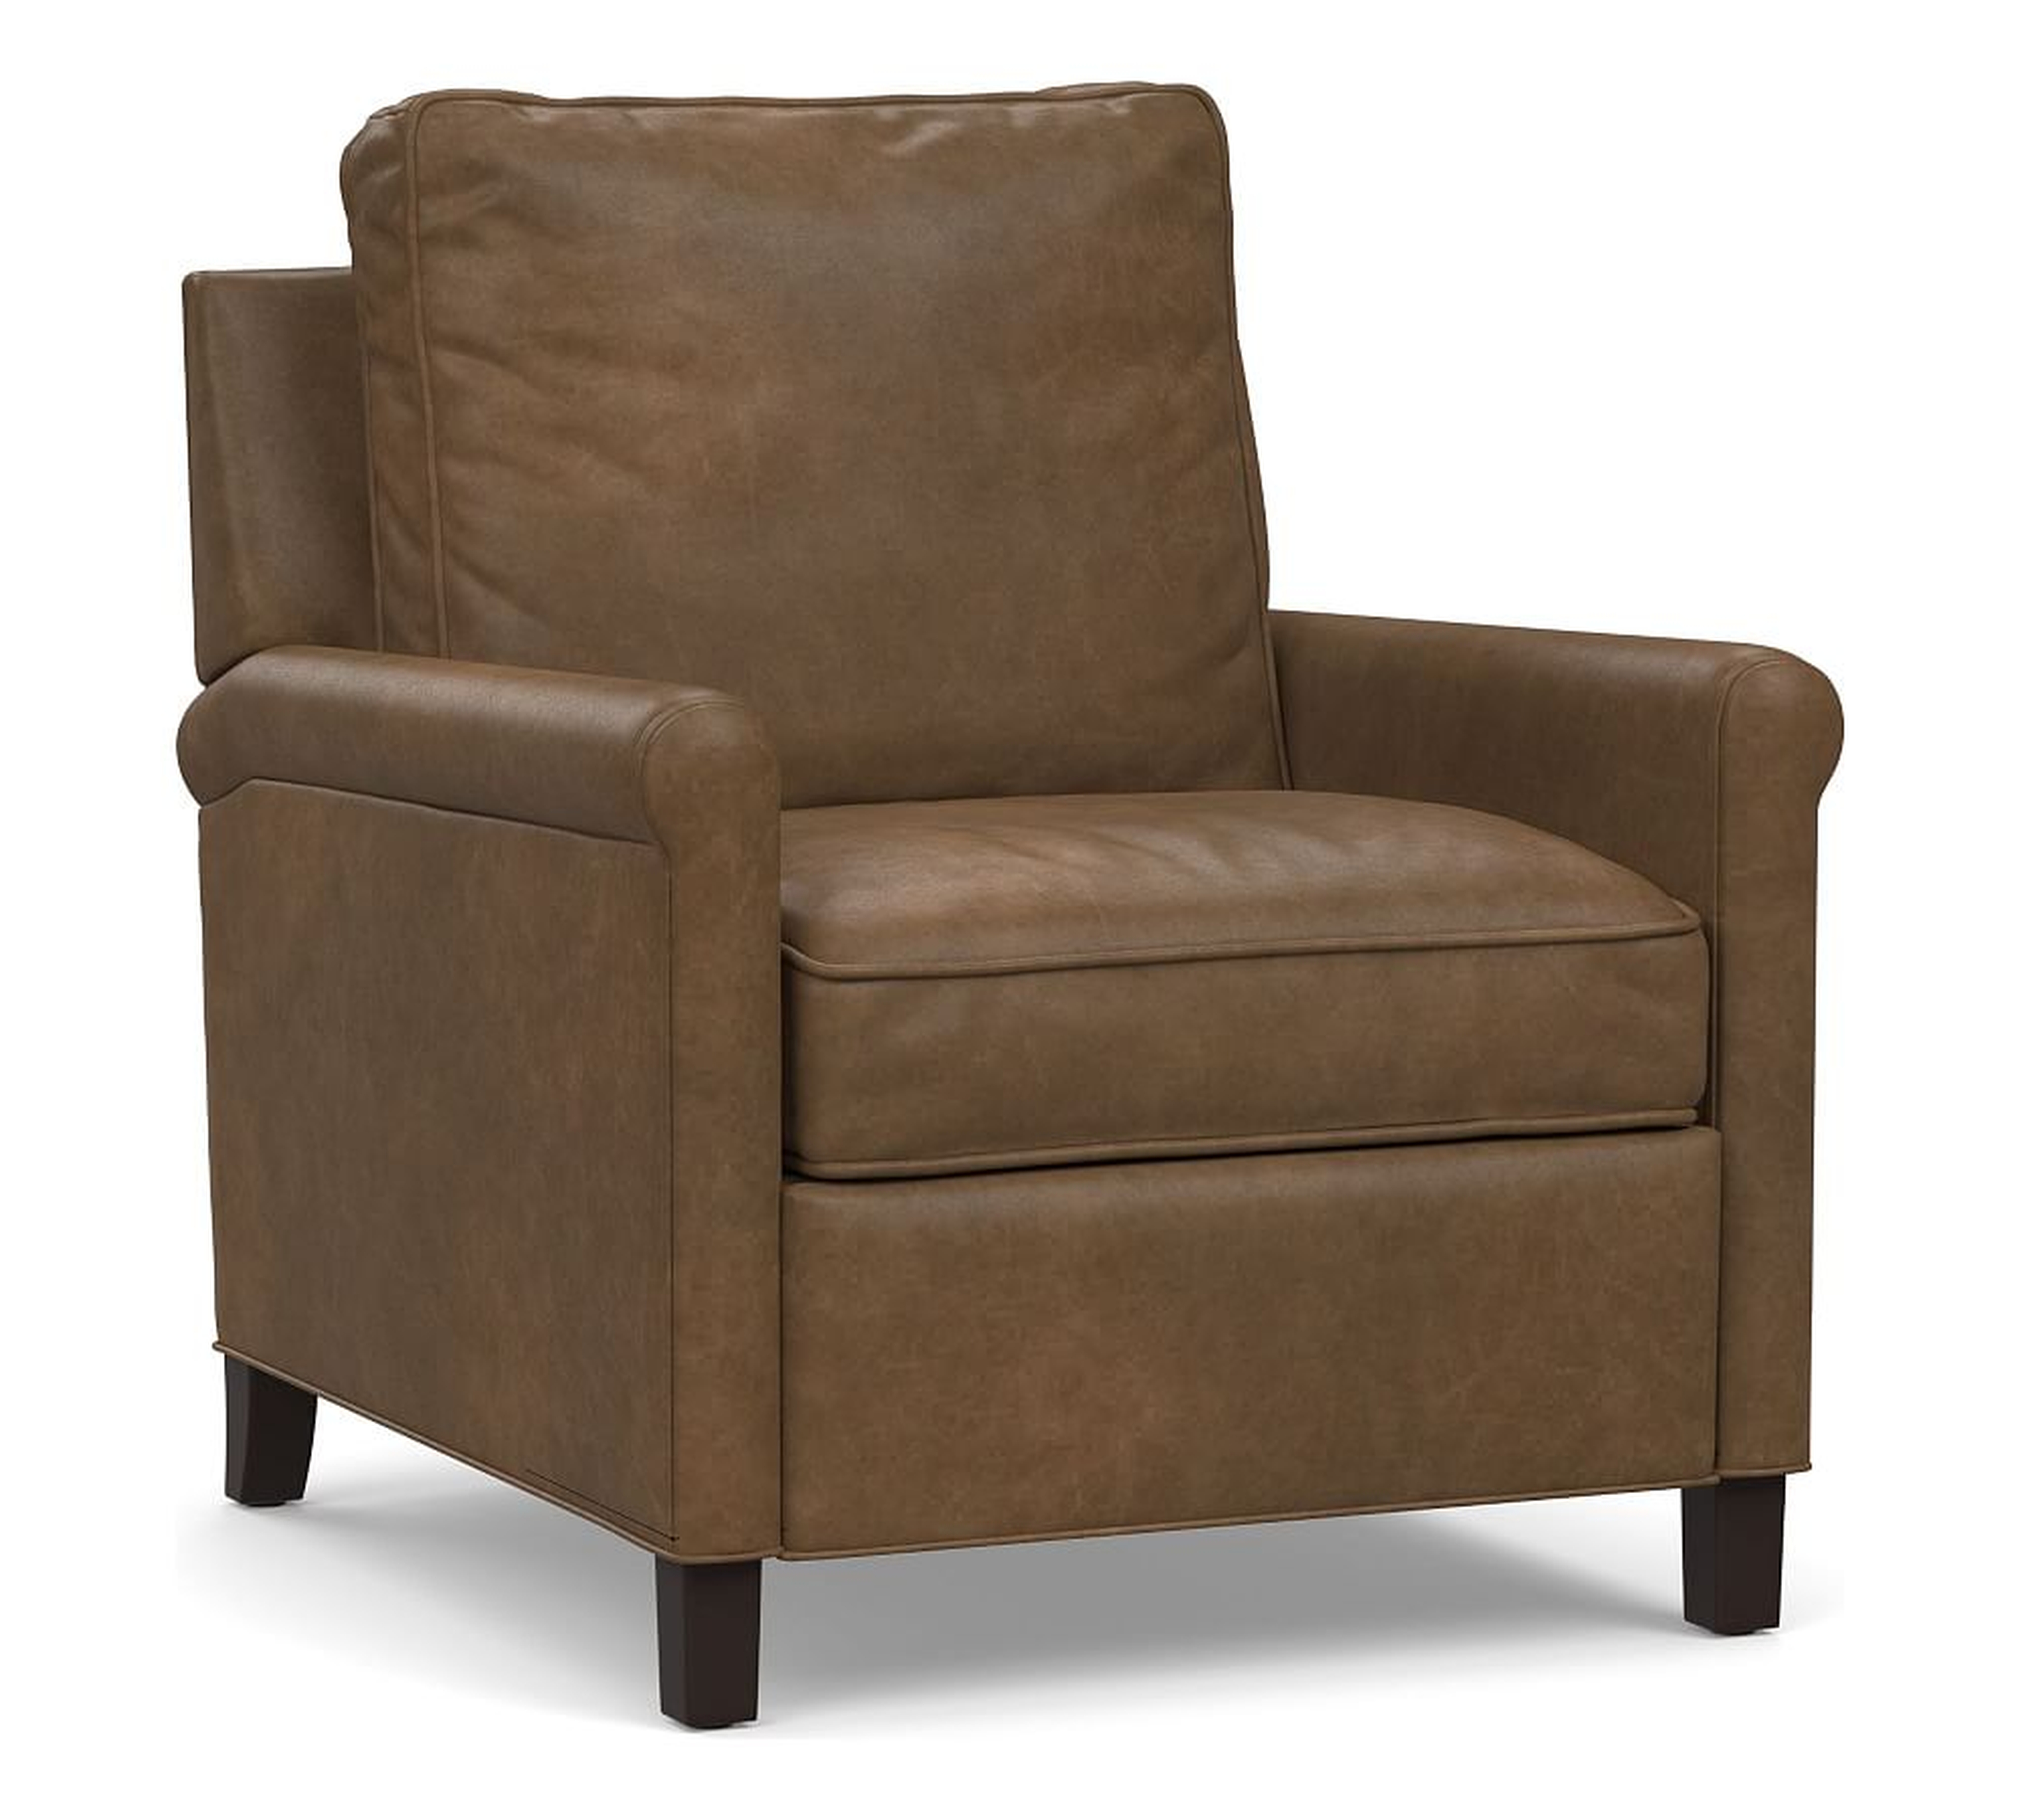 Tyler Roll Arm Leather Recliner without Nailheads, Down Blend Wrapped Cushions, Churchfield Chocolate - Pottery Barn